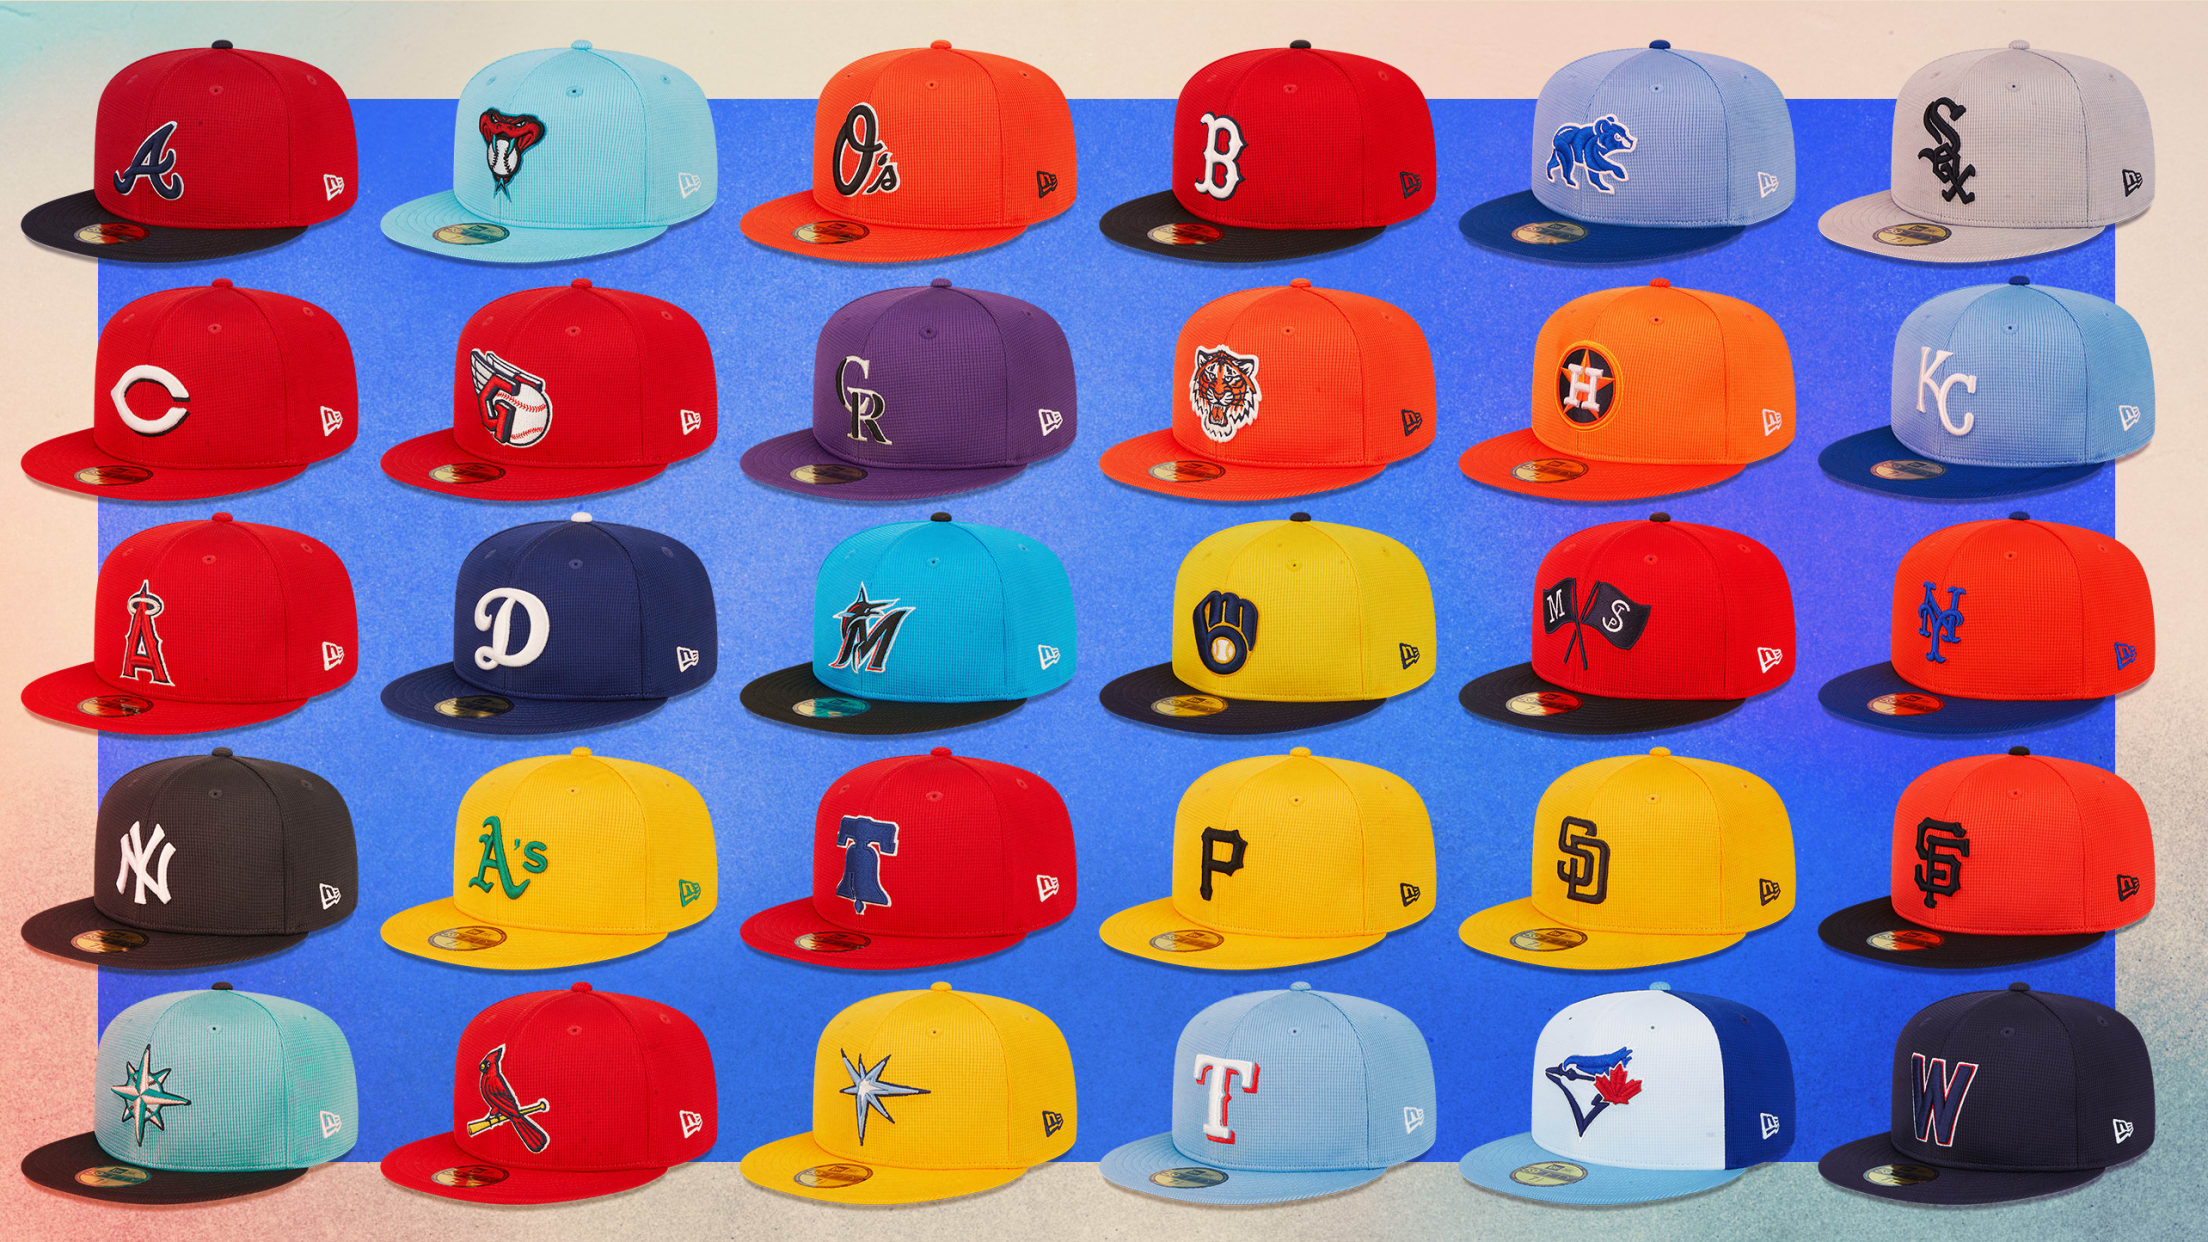 All 30 new Spring Training caps